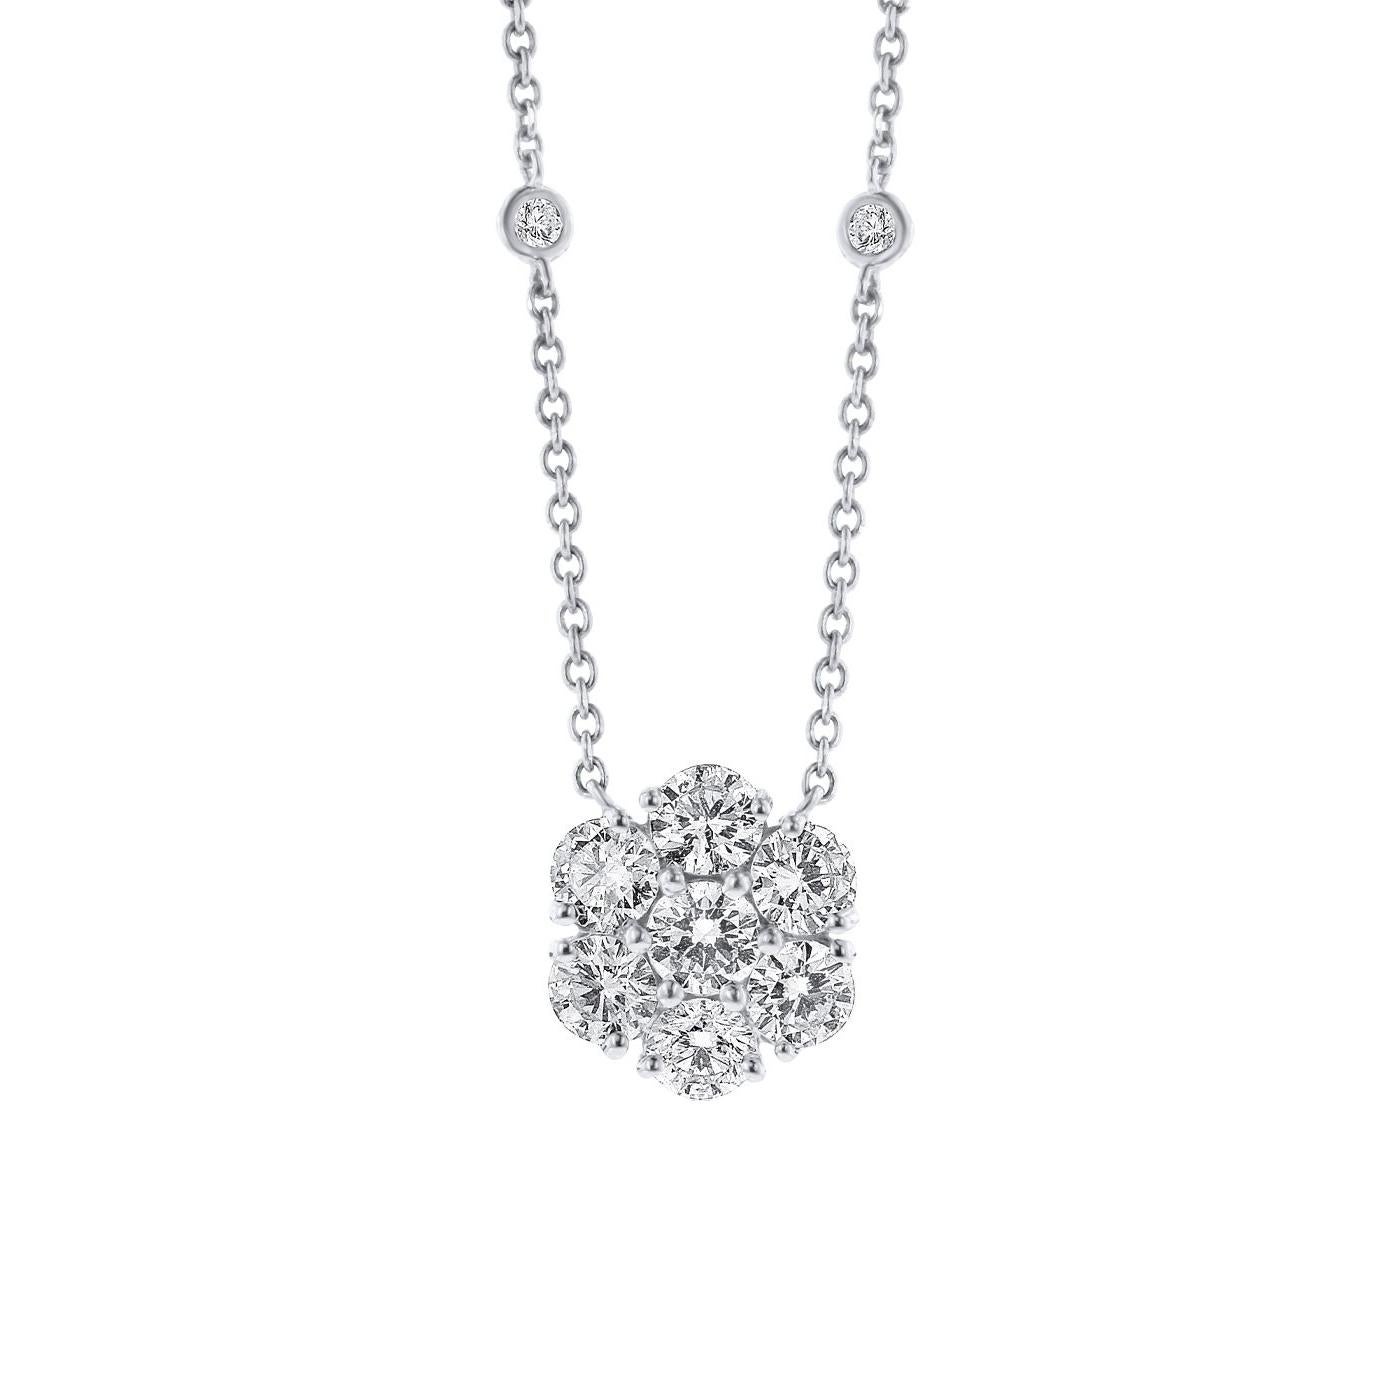 Brimming with style and elegance, this versatile 14K white gold flower necklace is amazing. The piece features a timeless and elegant design. It includes a cluster of diamonds set into a beautiful flower and fixed to the chain to keep it securely in